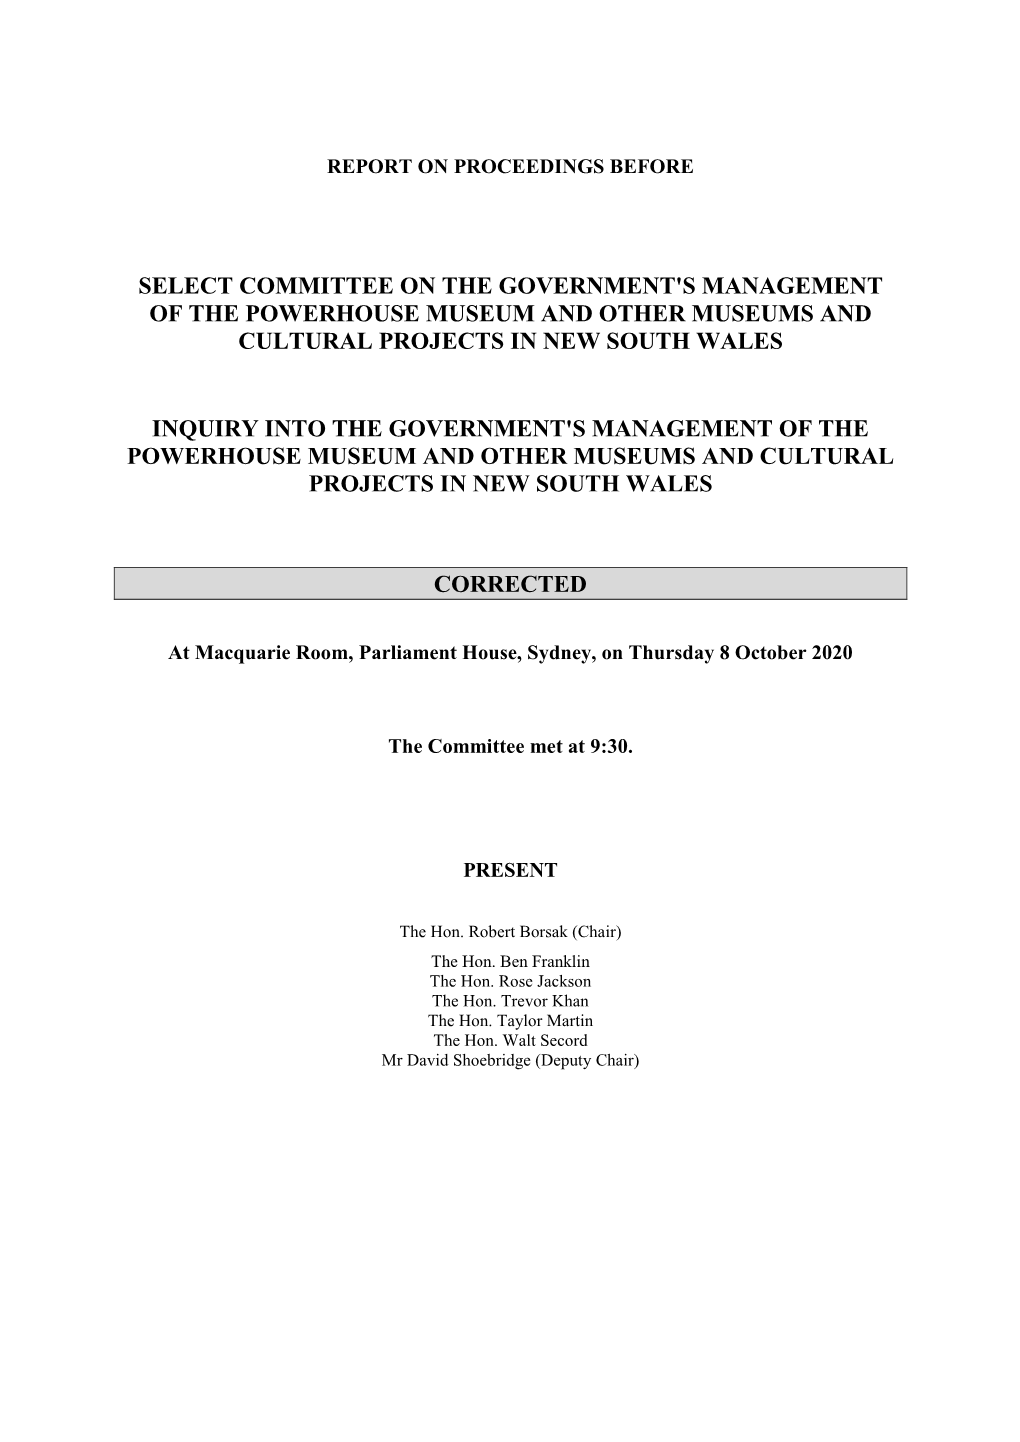 Select Committee on the Government's Management of the Powerhouse Museum and Other Museums and Cultural Projects in New South Wales